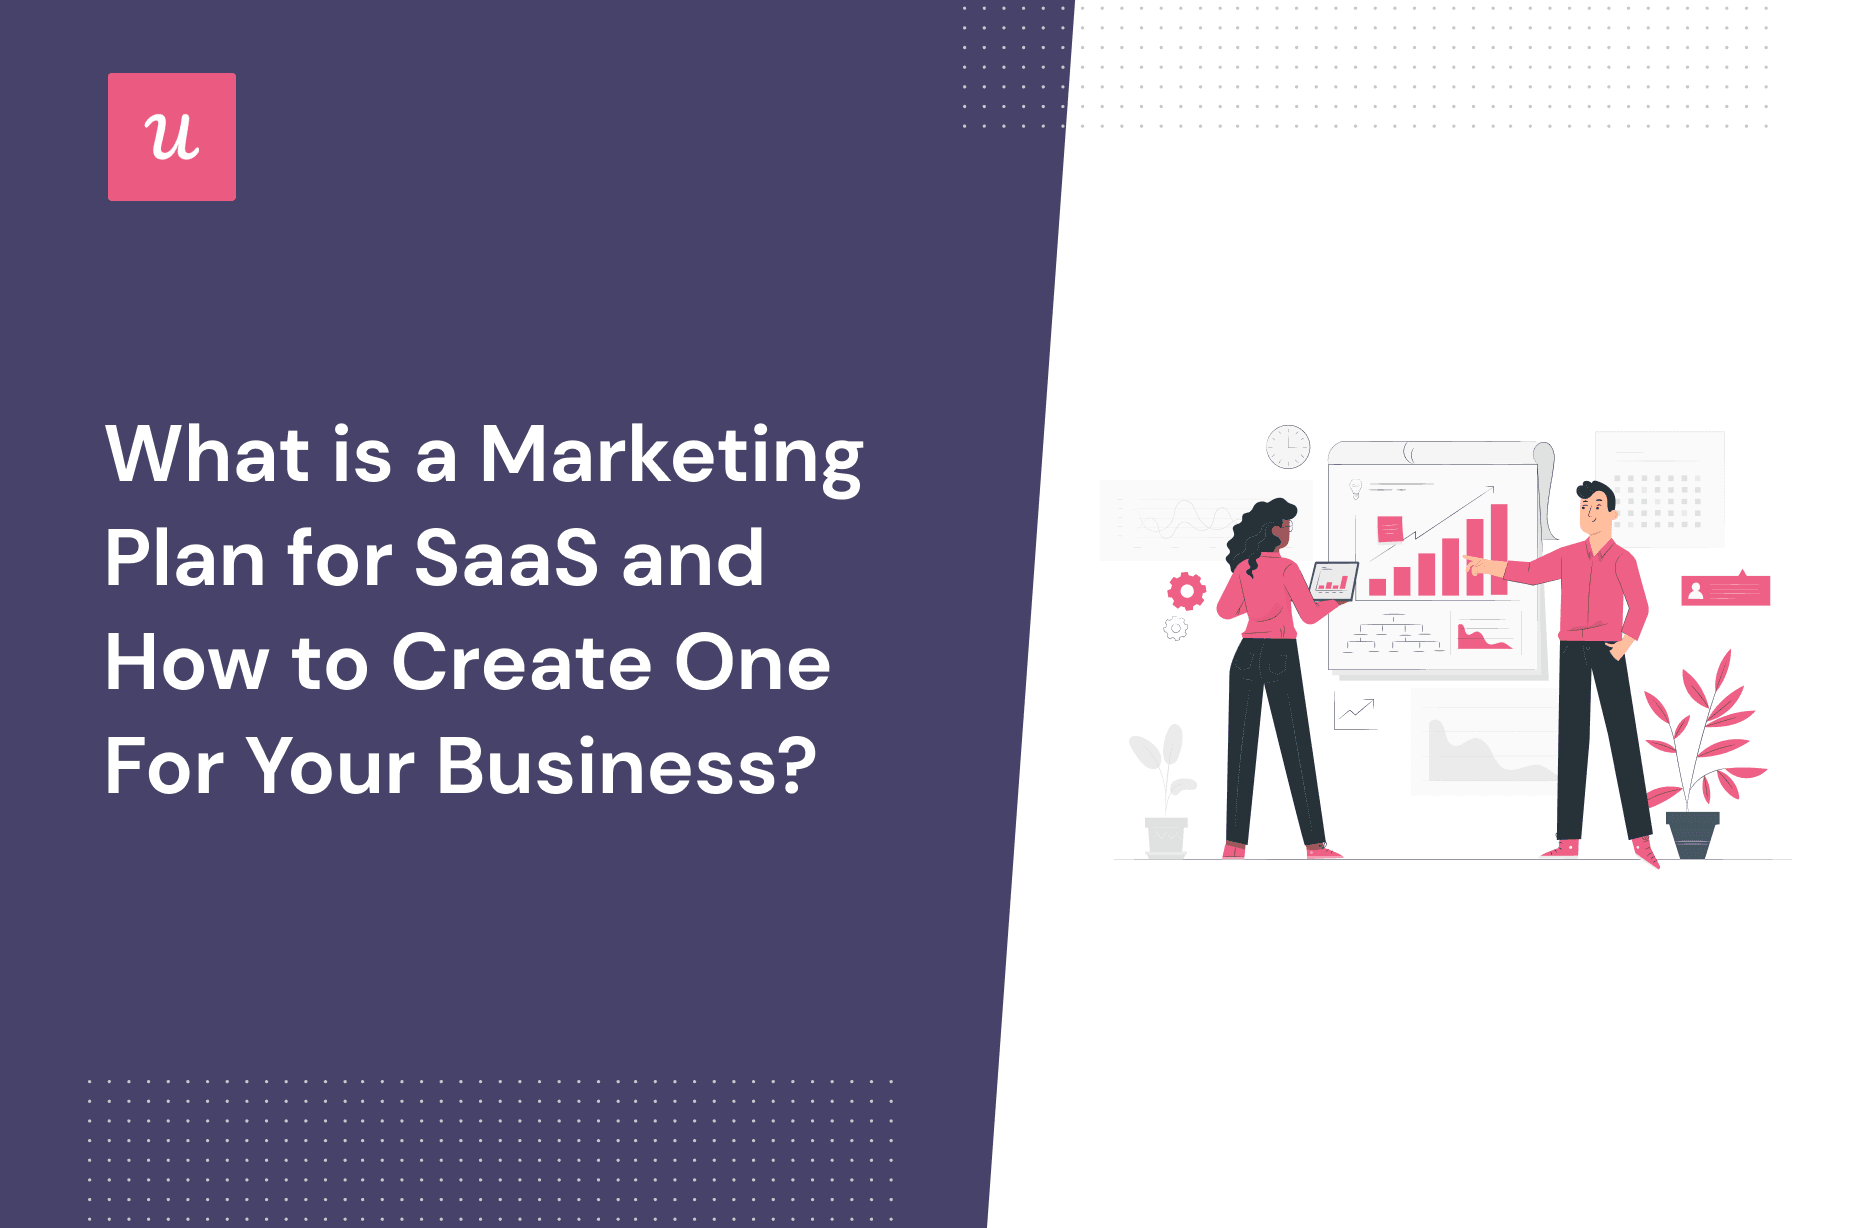 What is a SaaS marketing plan for and how to create one for your business?